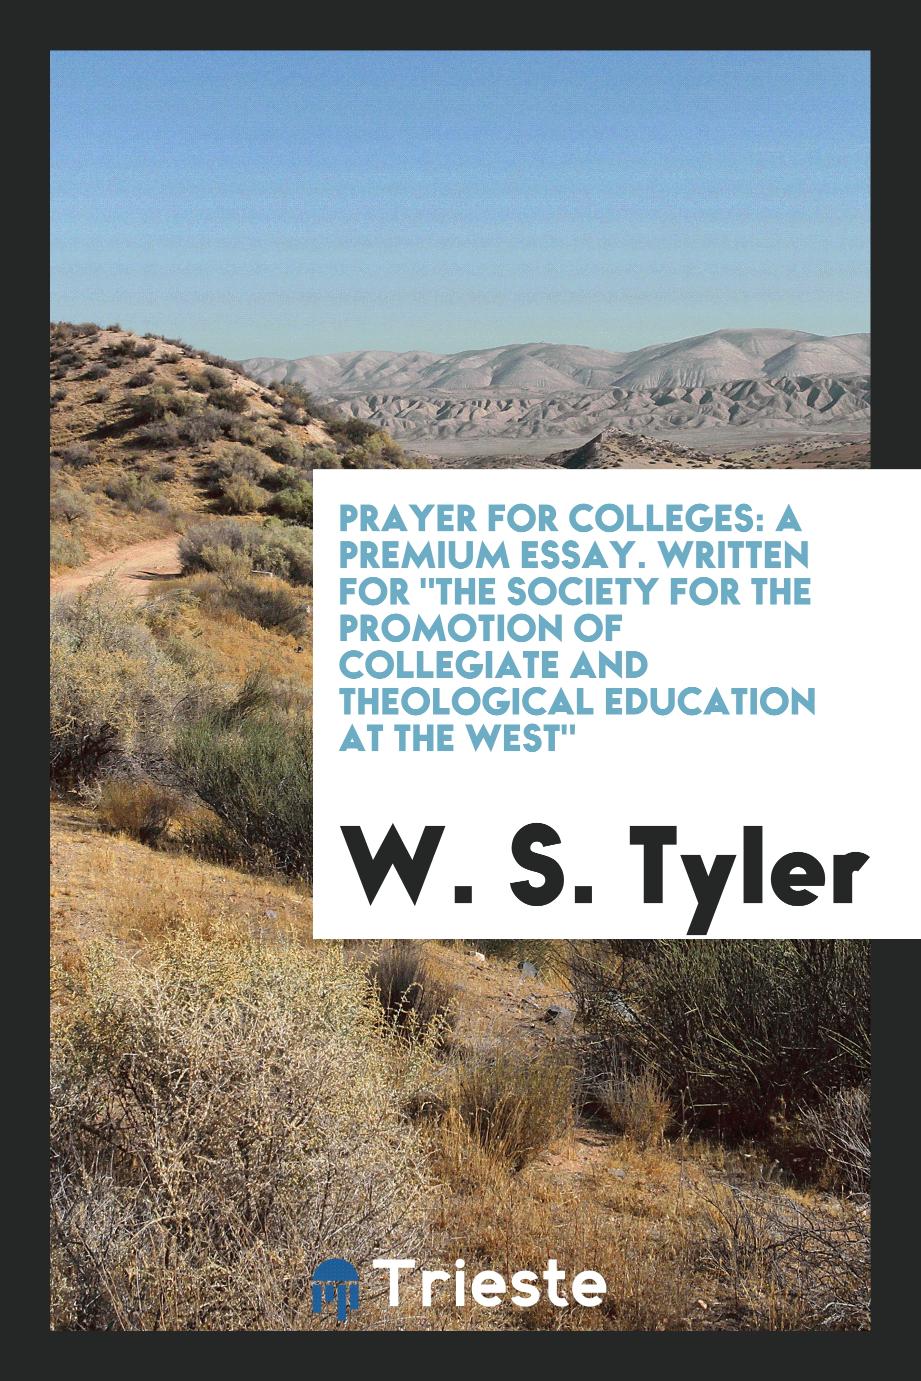 Prayer for colleges: a premium essay. Written for "The Society for the Promotion of Collegiate and Theological Education at the West"